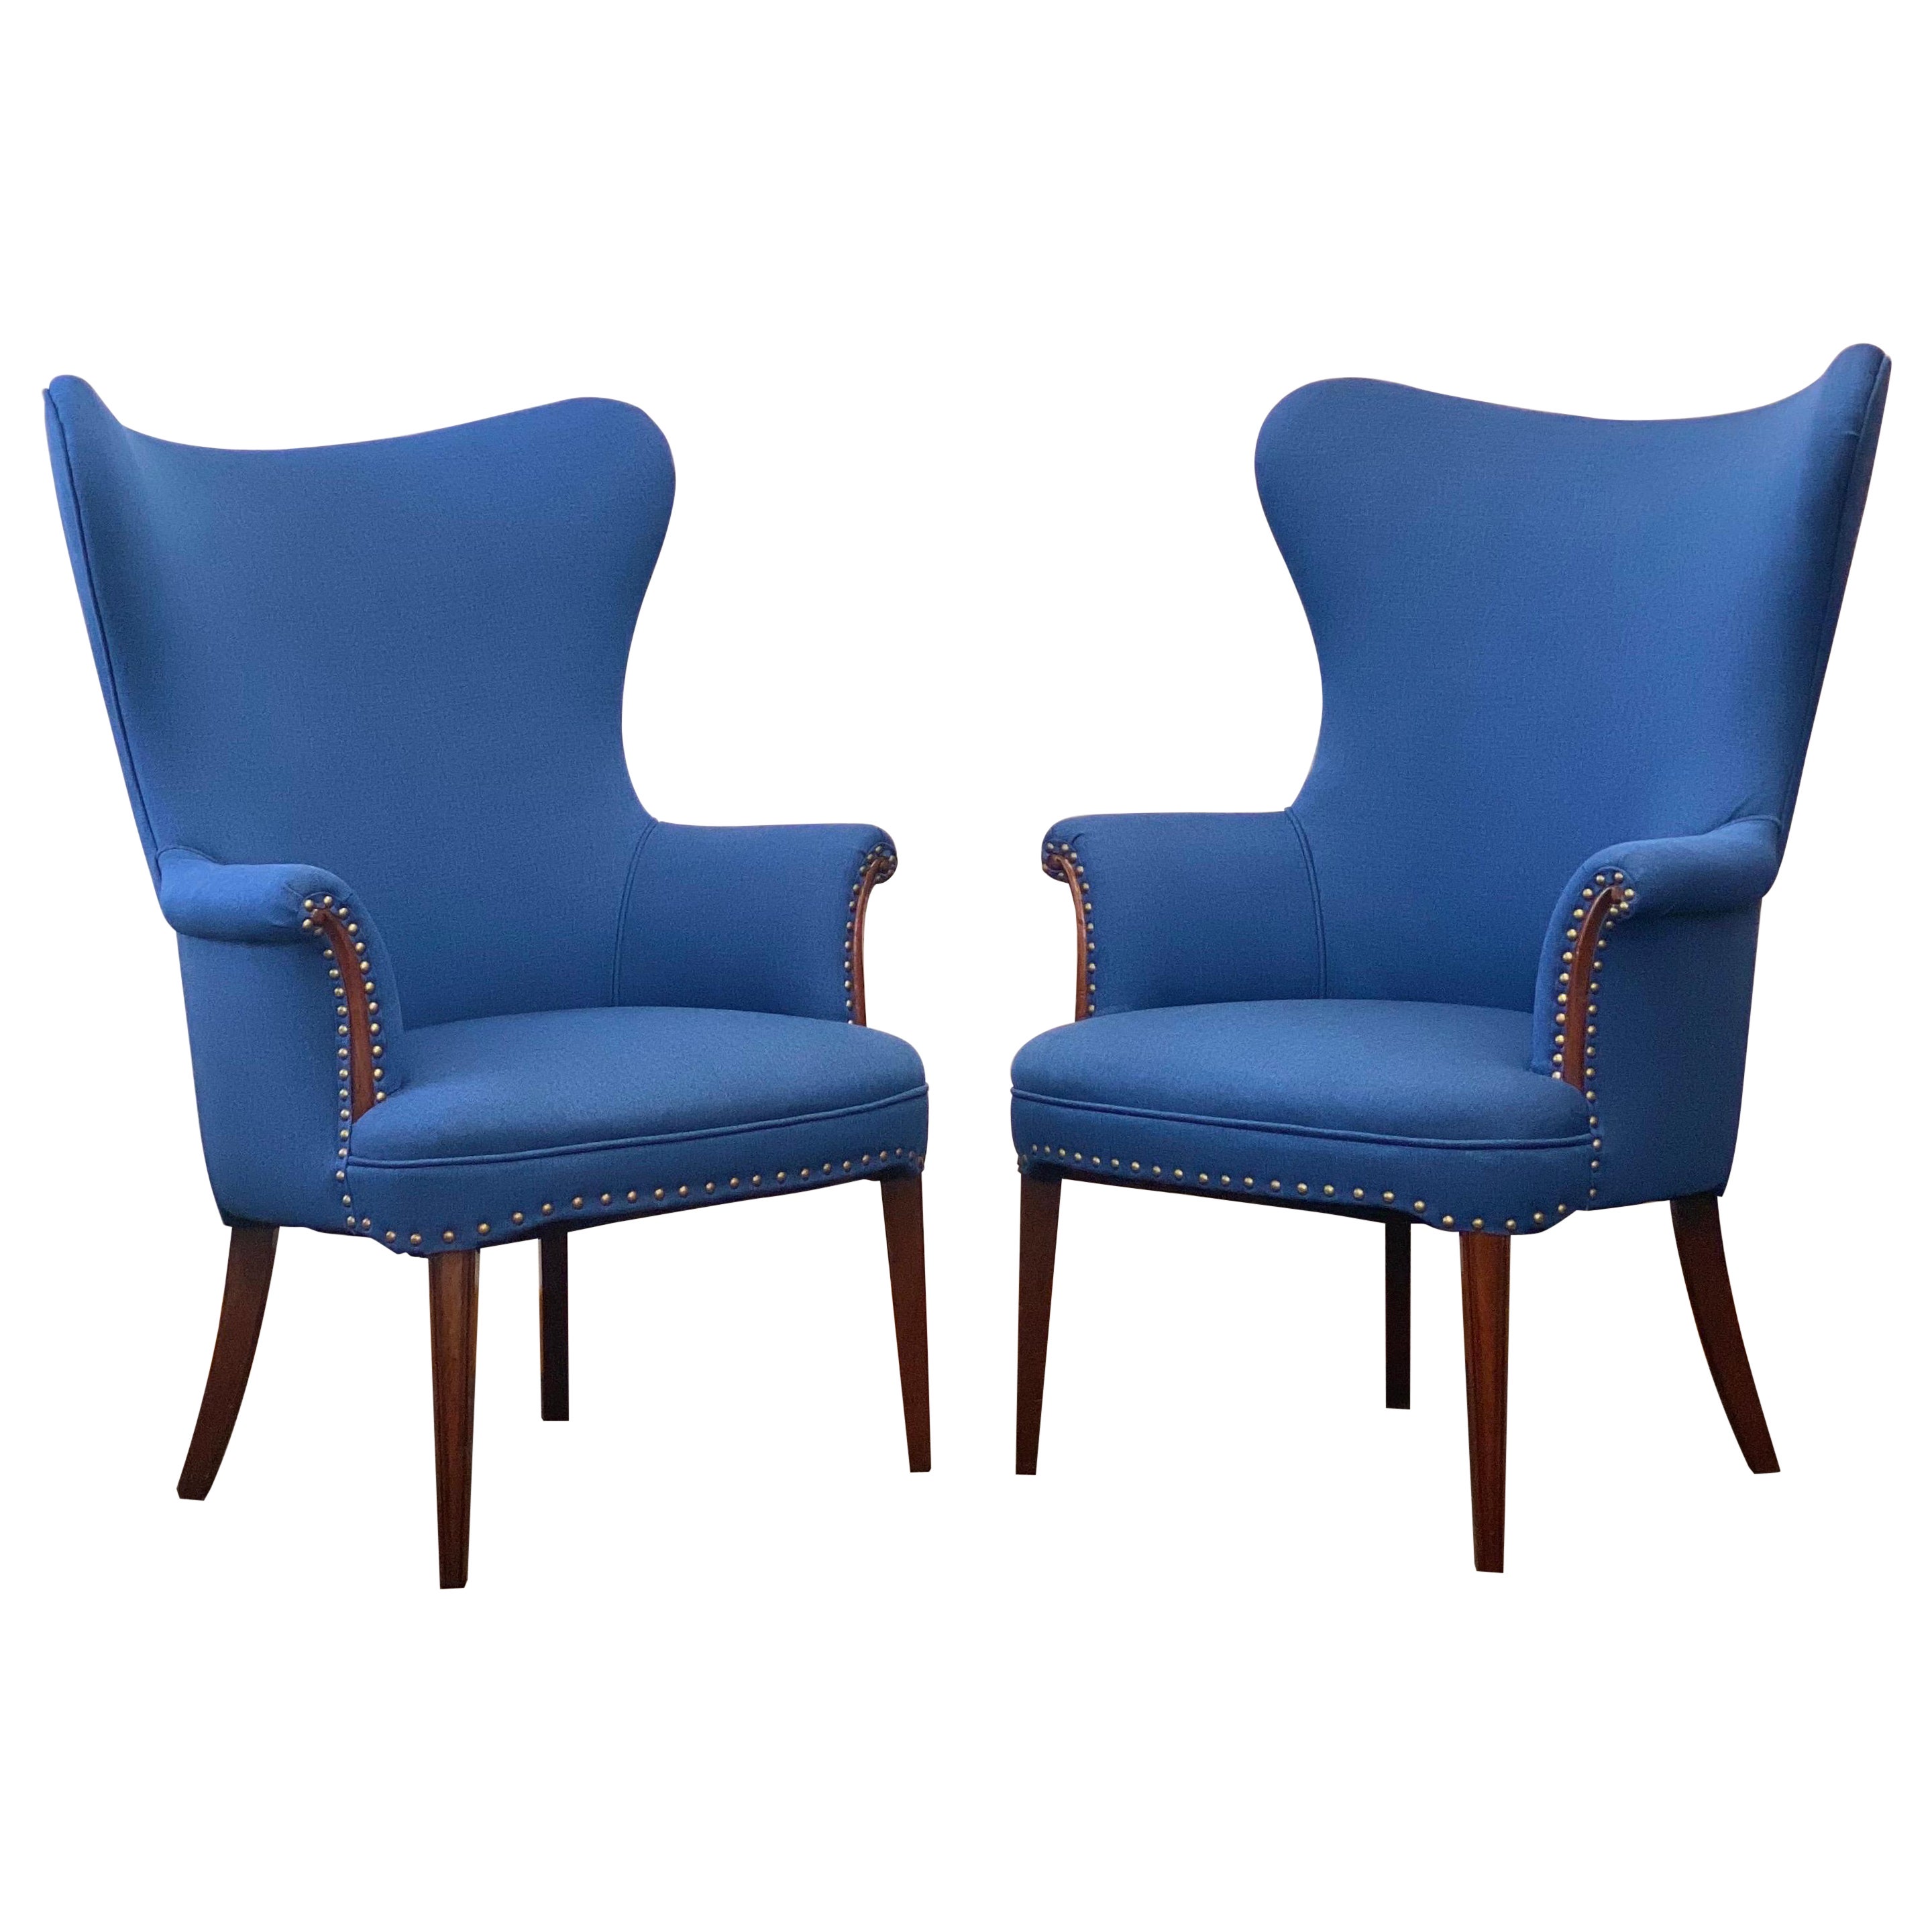 1950s Mid-Century Modern Butterfly Royal Blue Wingback Chairs, a Pair